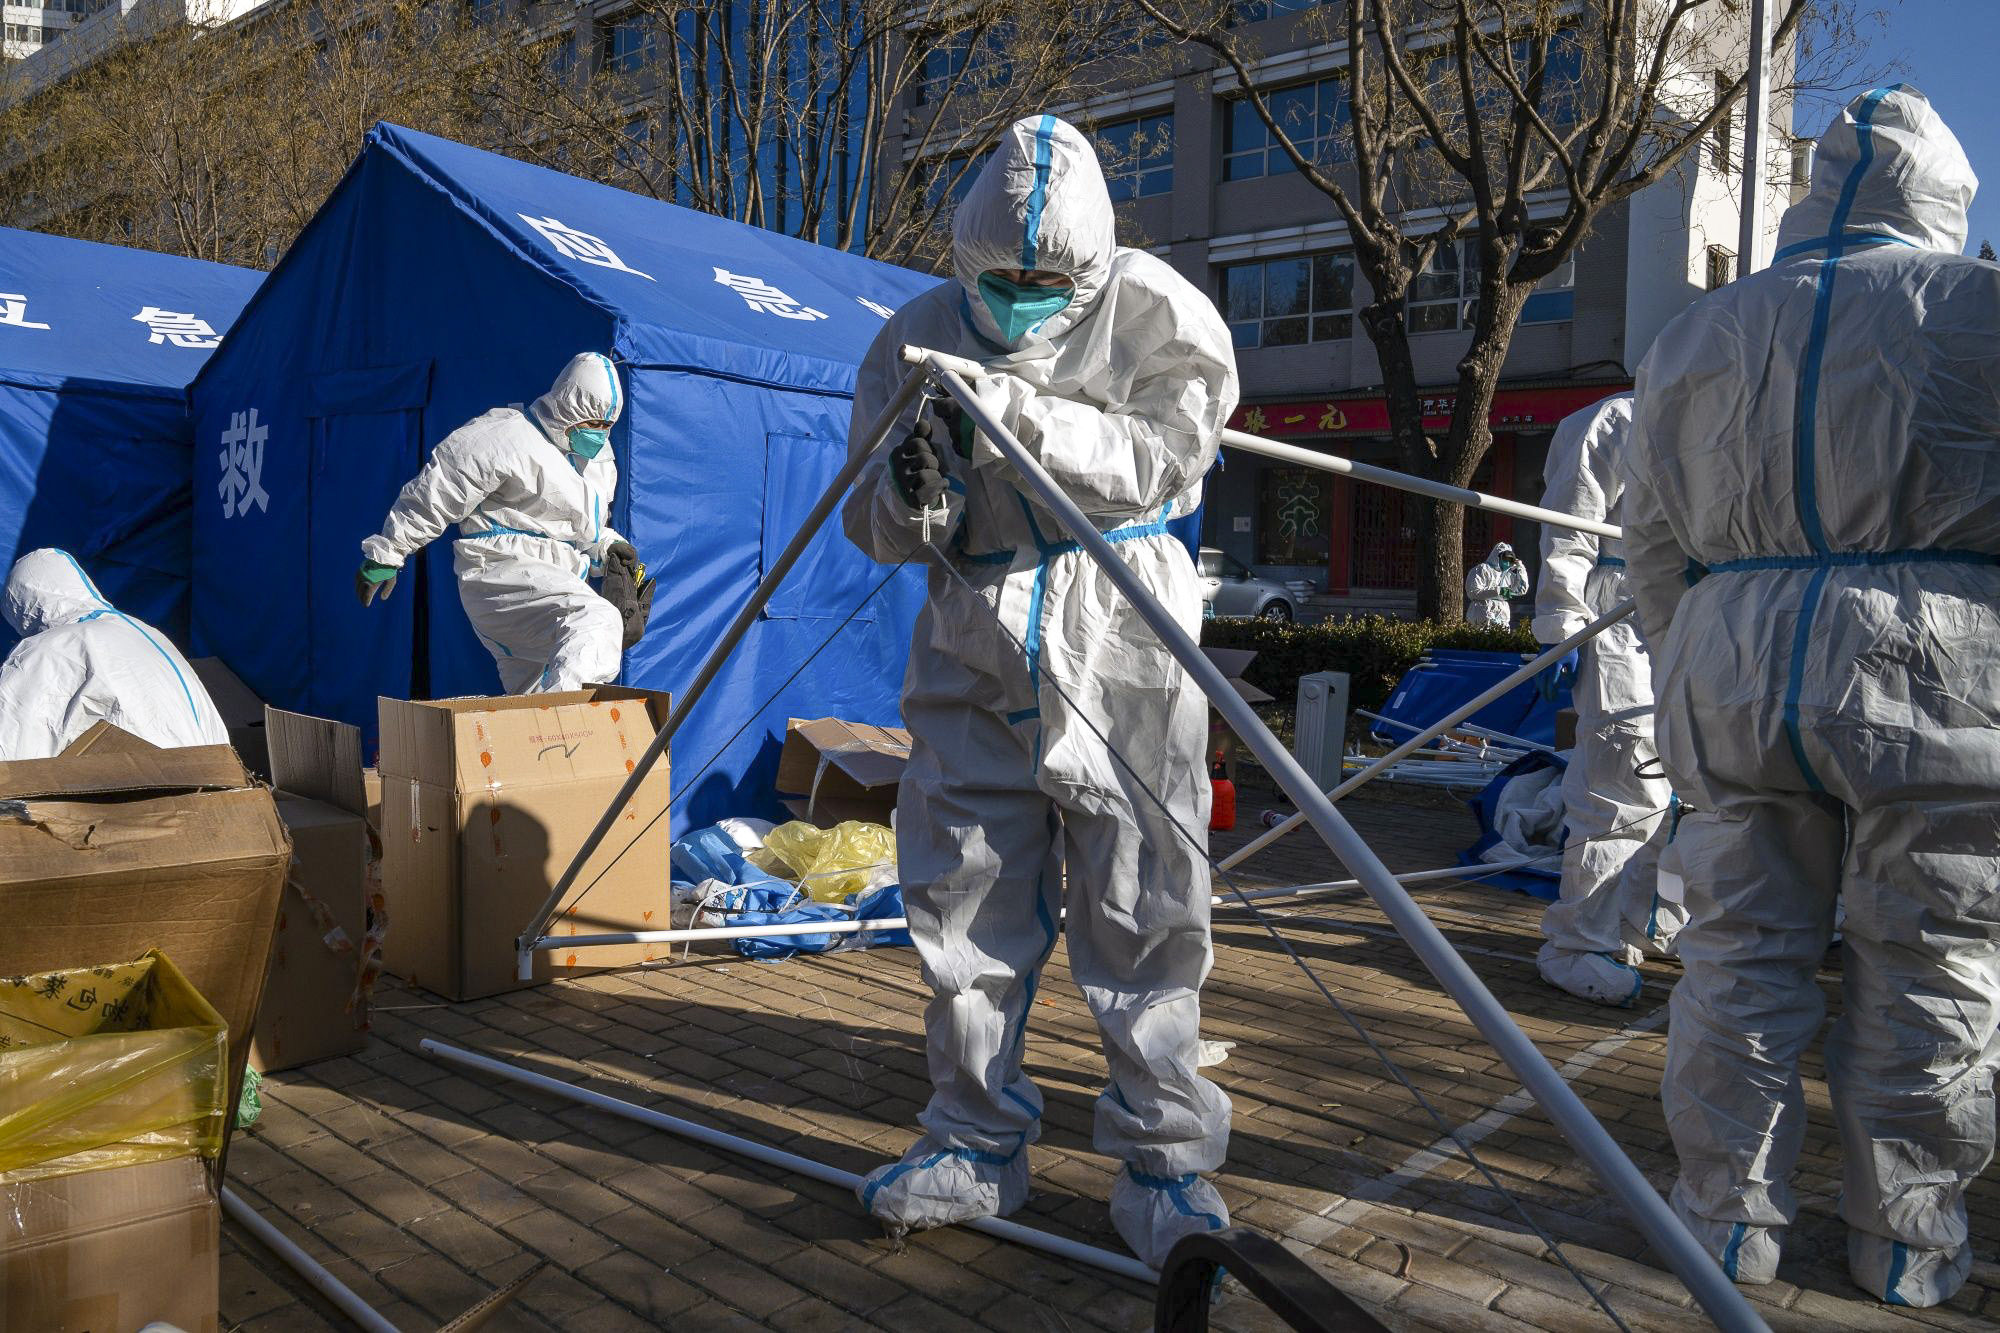 Vice-Premier Sun Chunlan, who leads the country’s pandemic response, says China’s virus controls are entering a new phase. Photo: Bloomberg